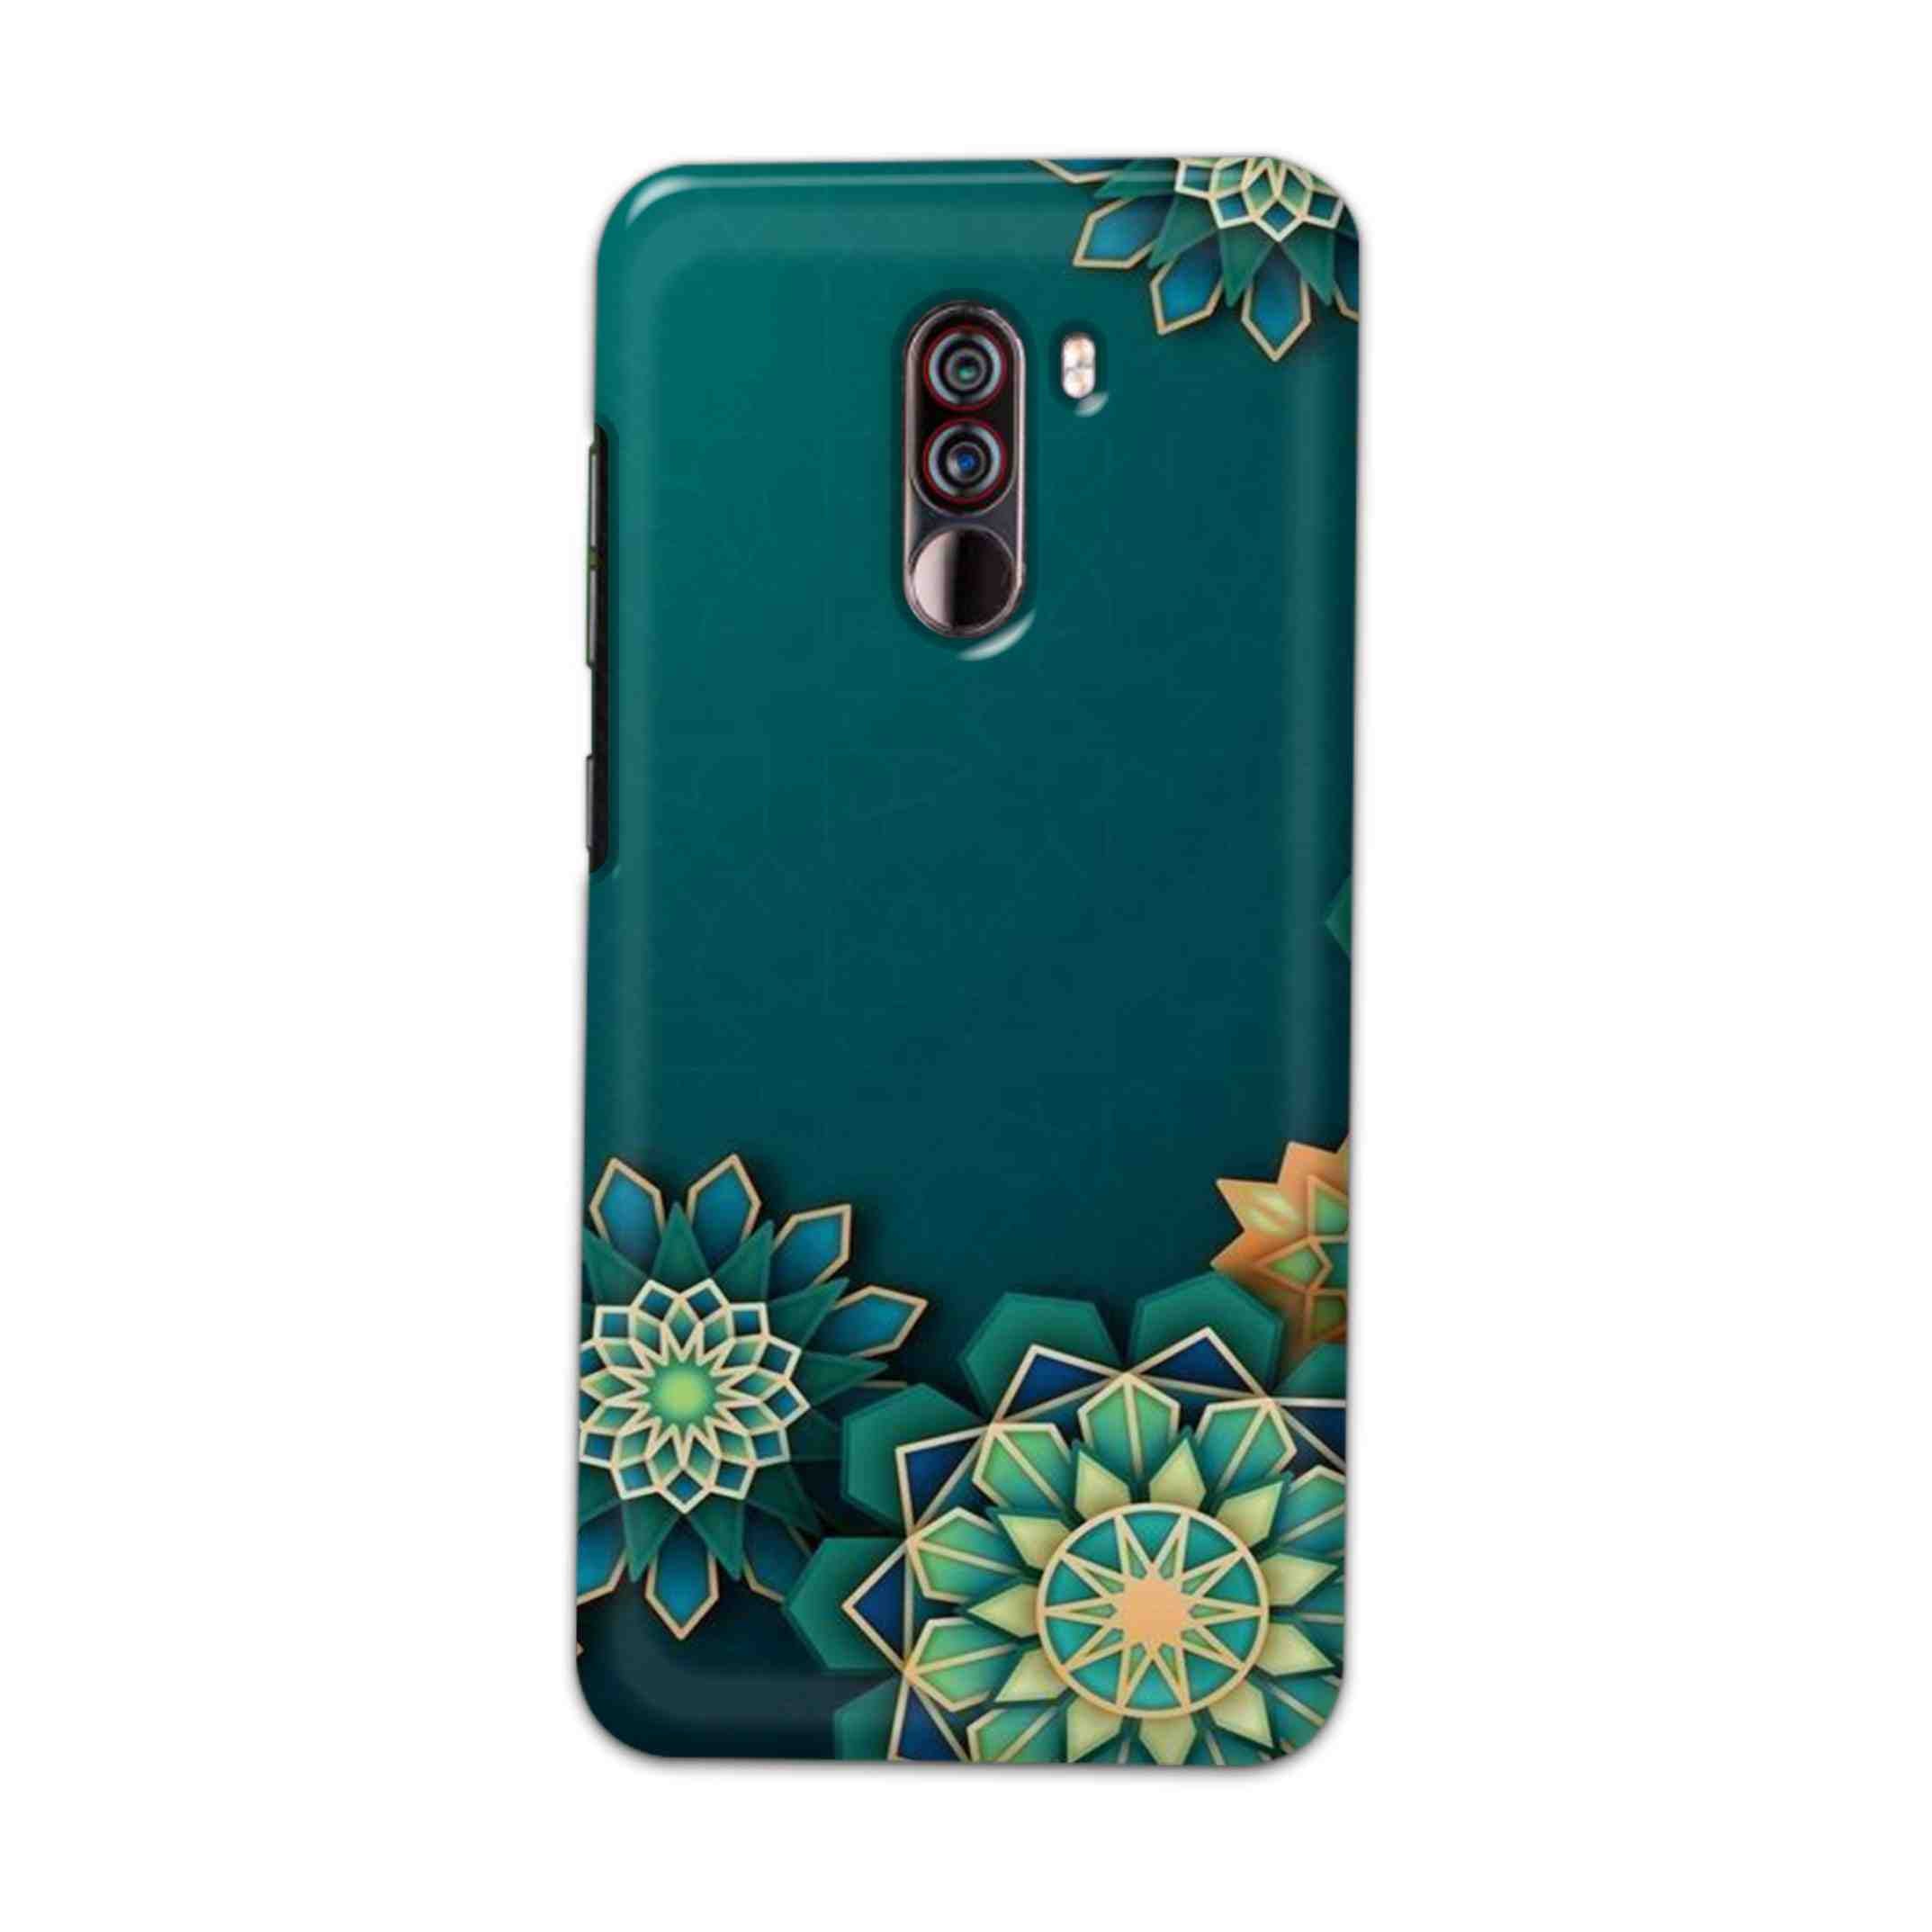 Buy Green Flower Hard Back Mobile Phone Case Cover For Xiaomi Pocophone F1 Online